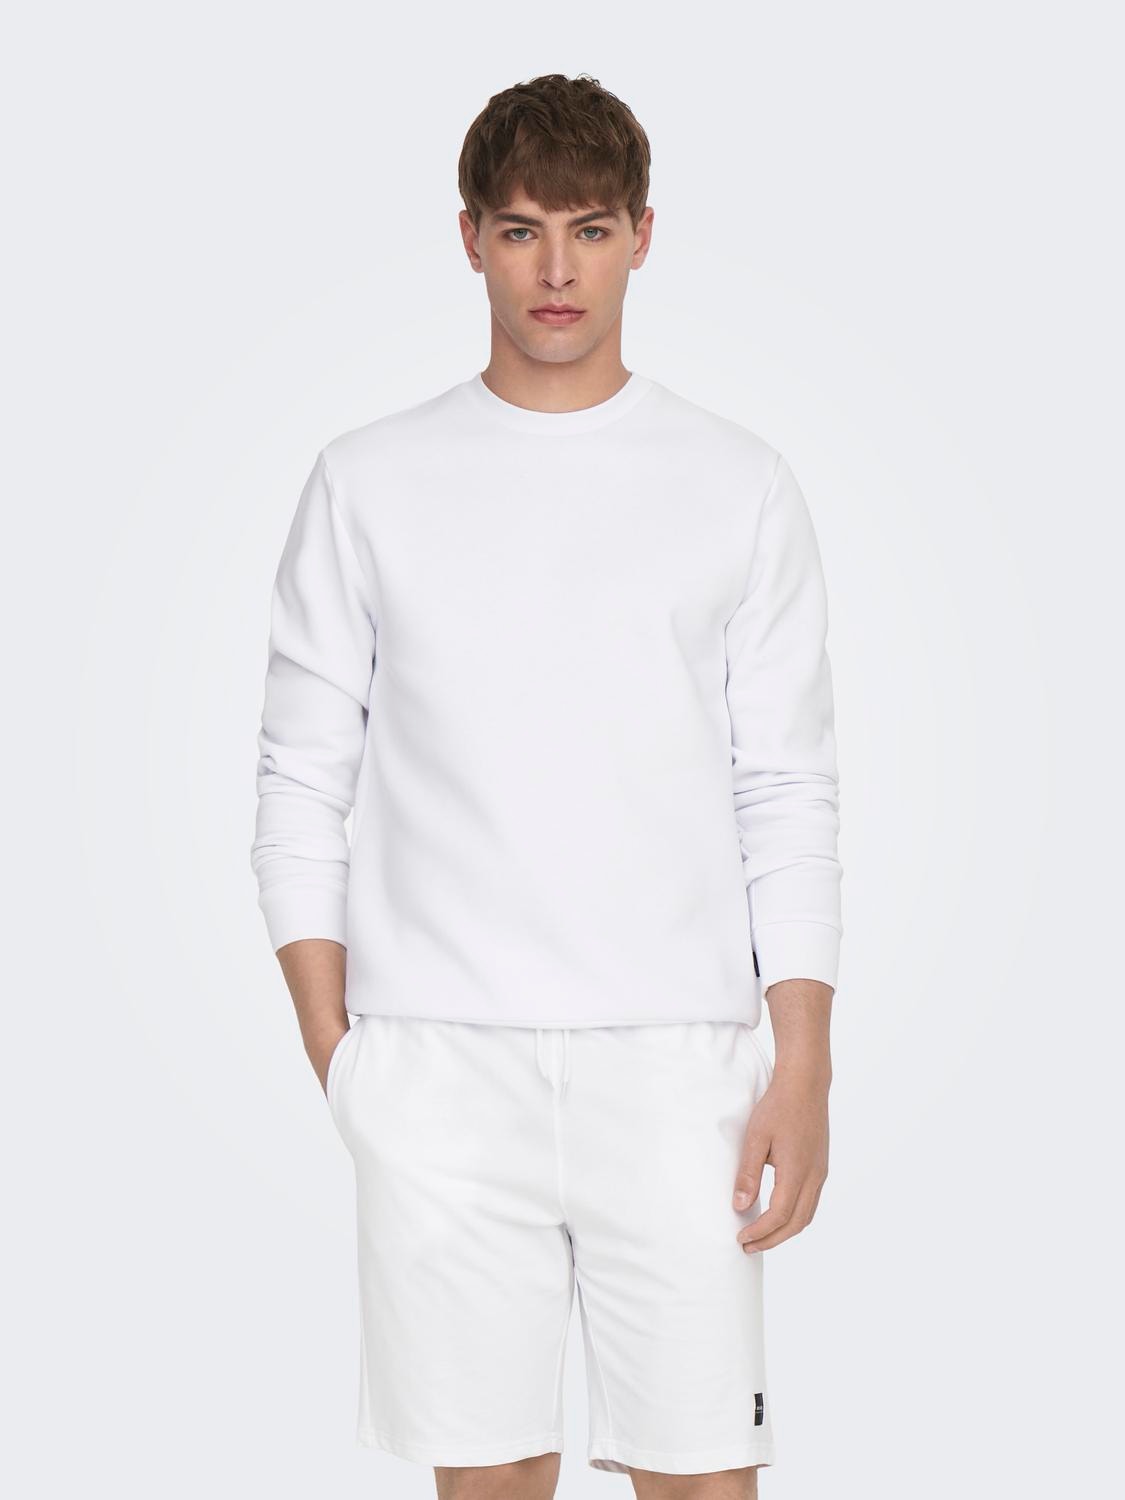 ONLY & SONS O-neck sweatshirt -Bright White - 22018683